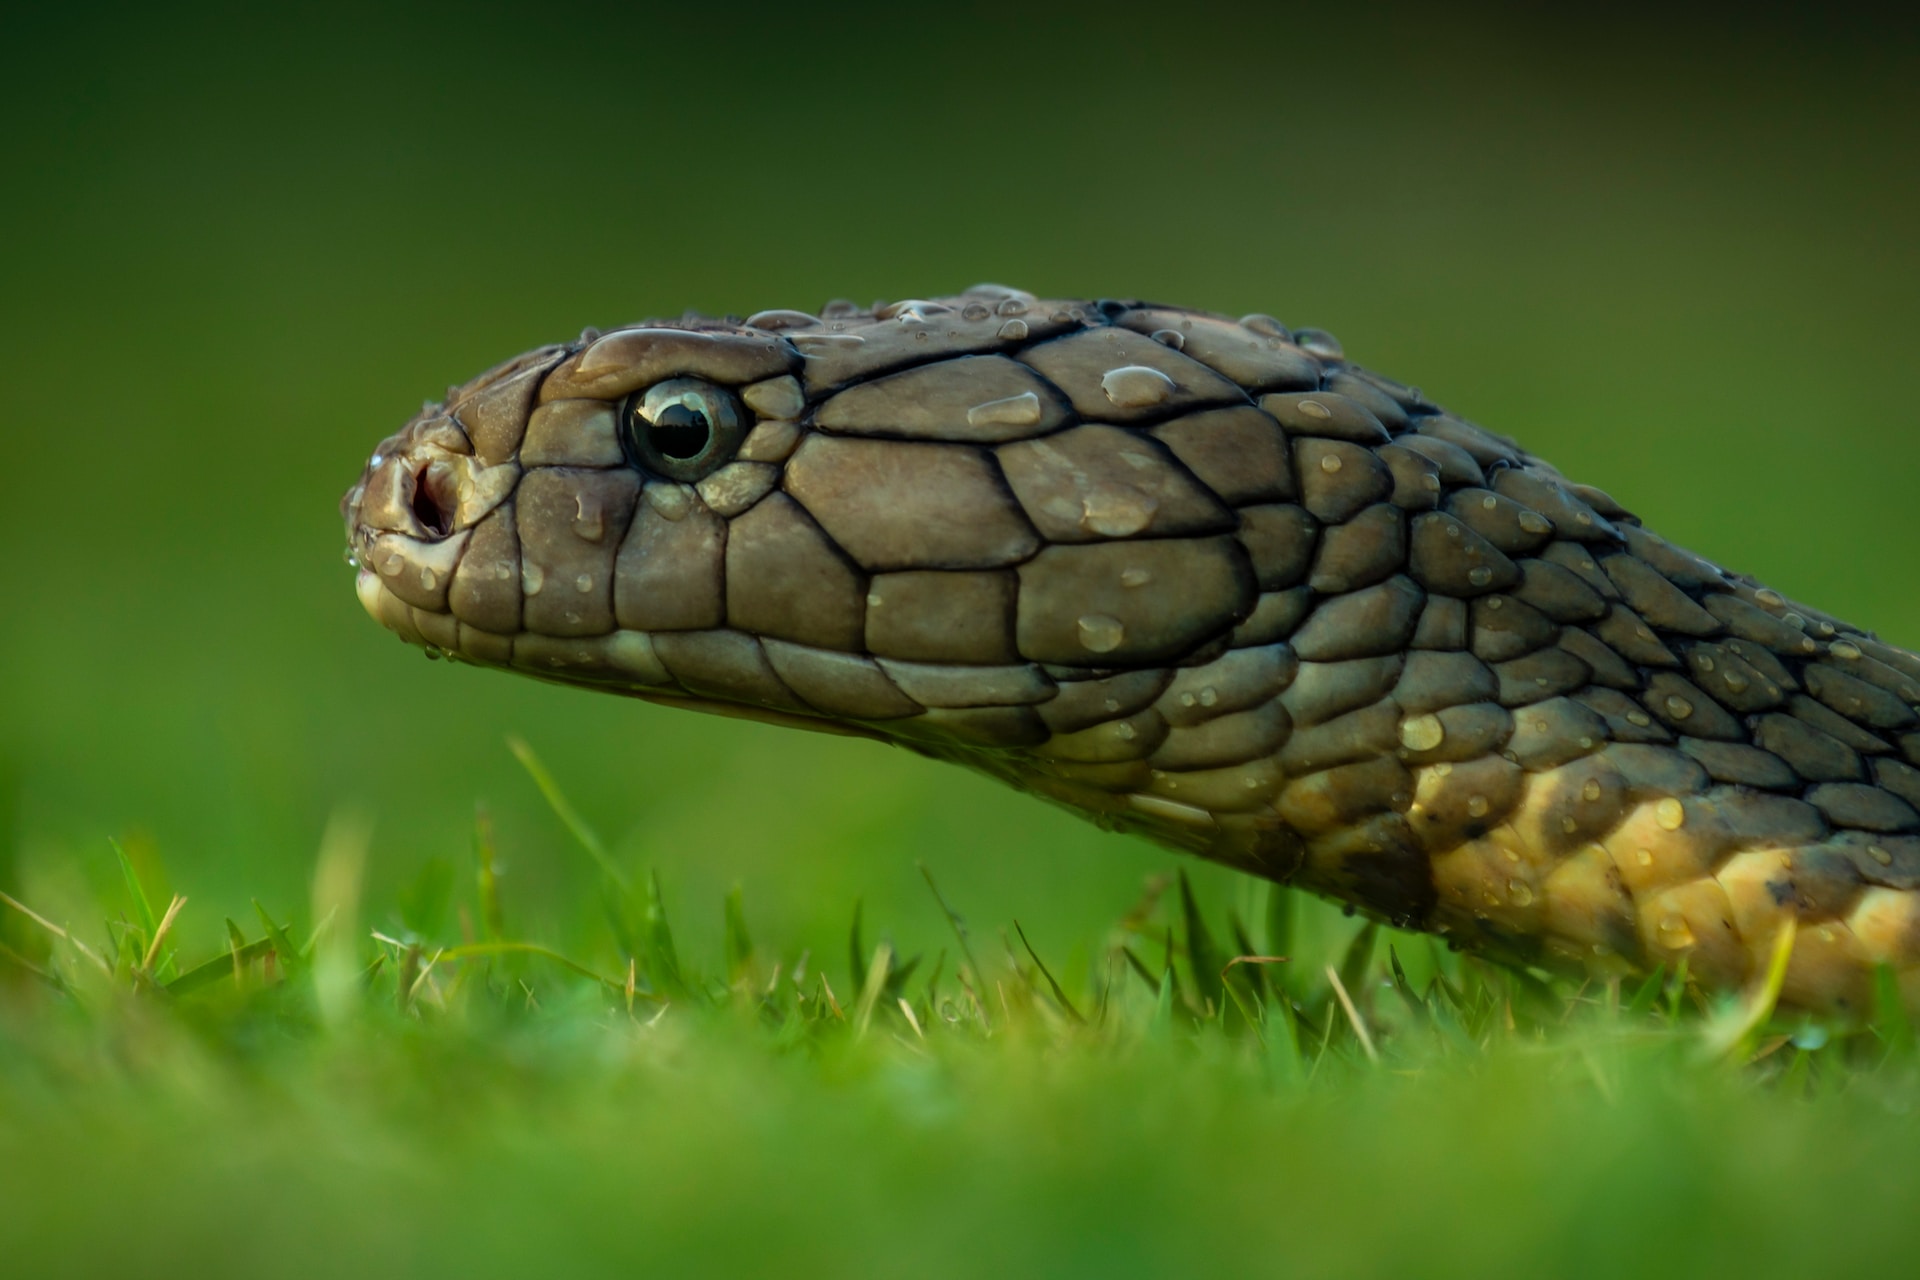 Why Do Snakes Shed Their Skin?